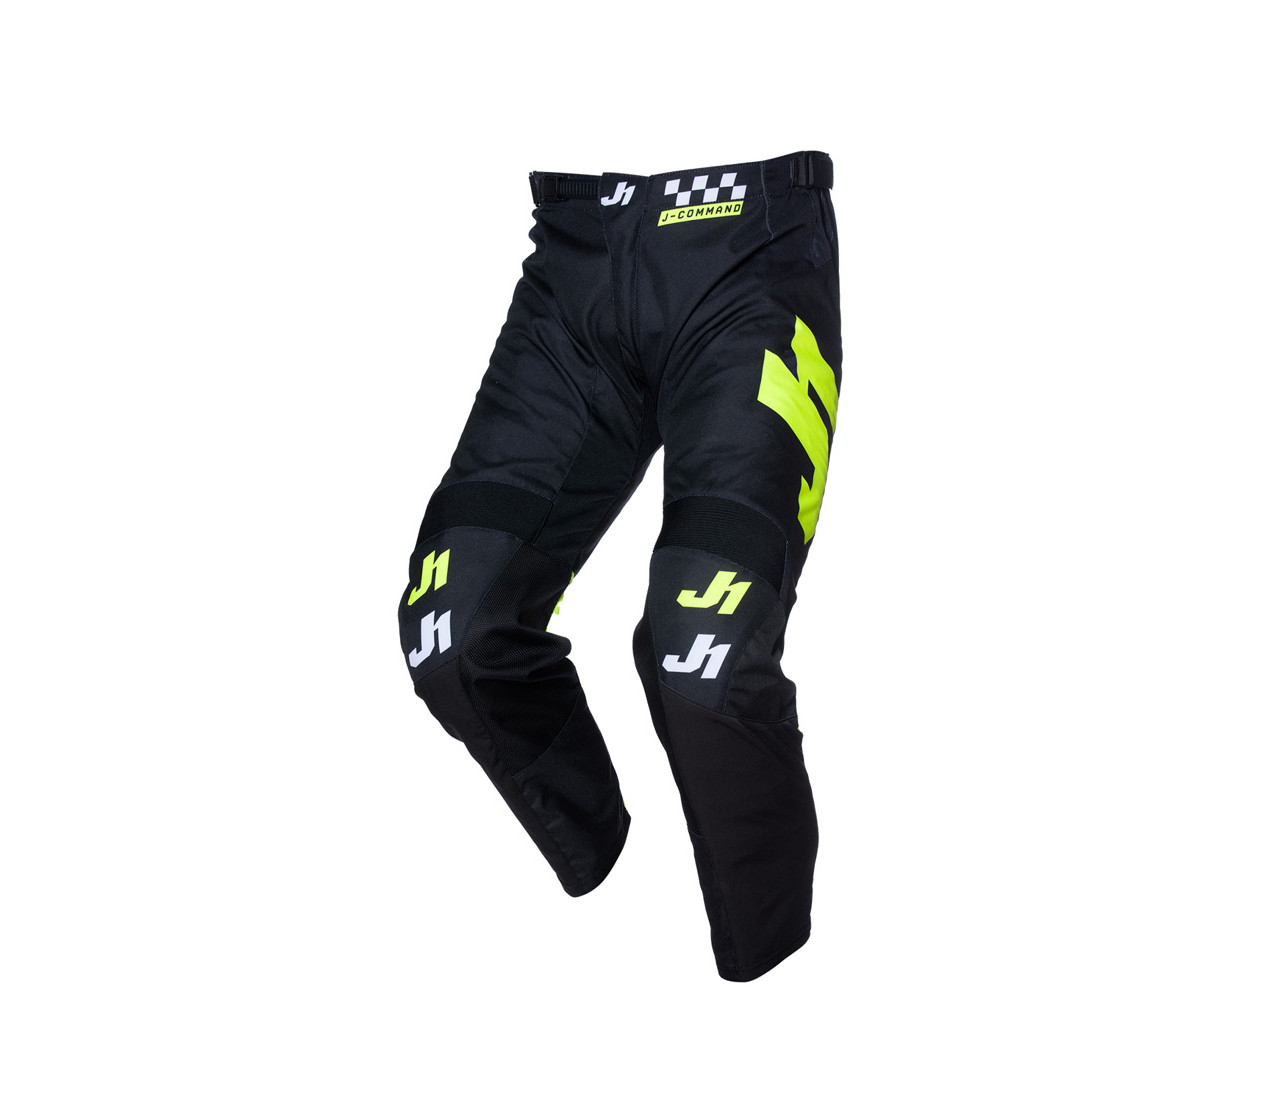 JUST1 PANTS J-COMMAND COMPETITION BLACK YELLOW FLUO